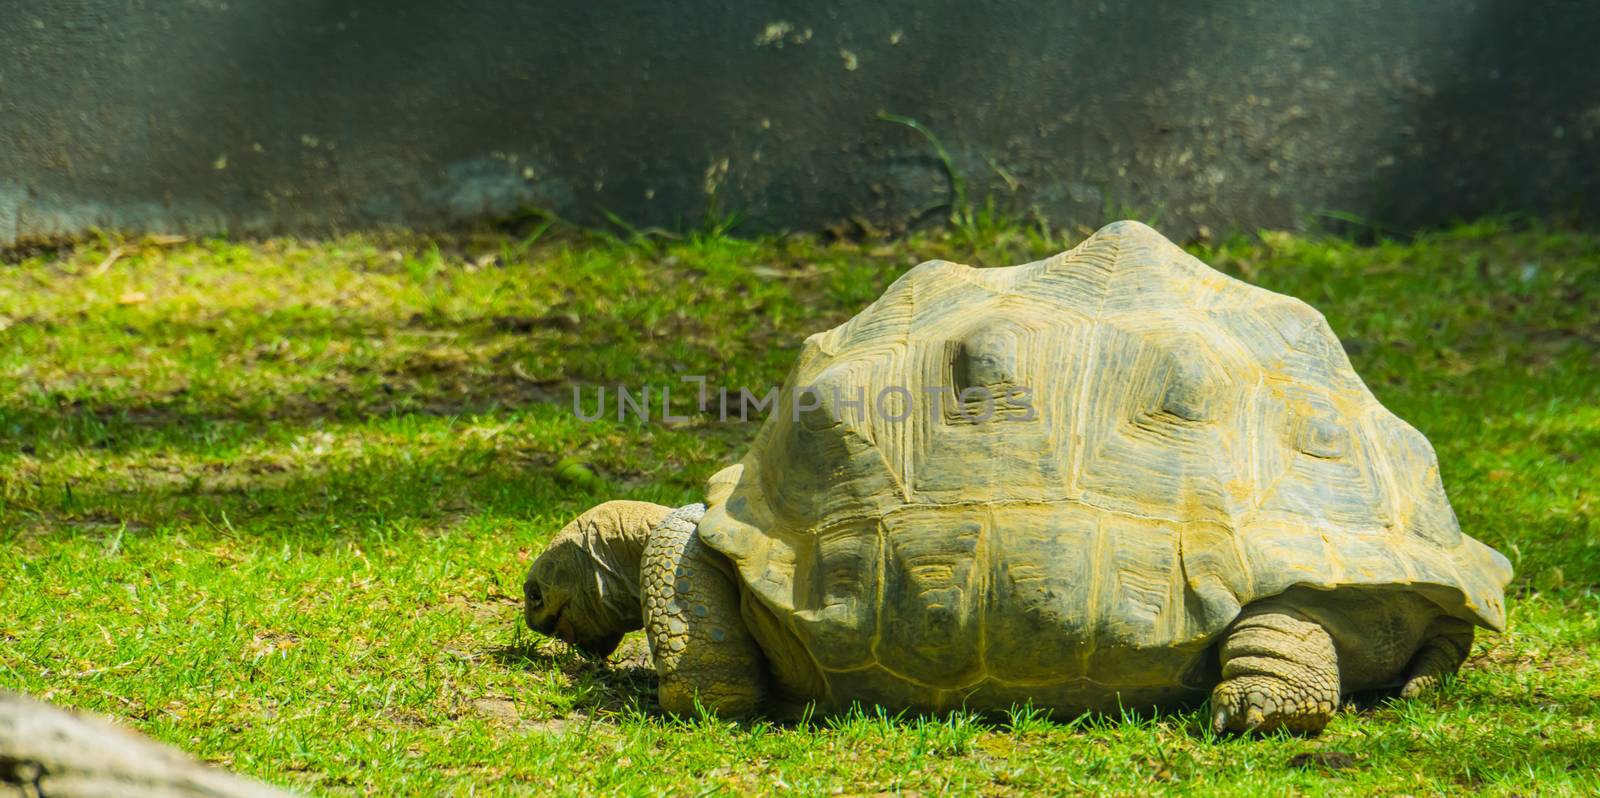 Aldabra giant tortoise, largest land turtle specie in the world, tropical turtle specie from Madagascar with vulnerable status by charlottebleijenberg